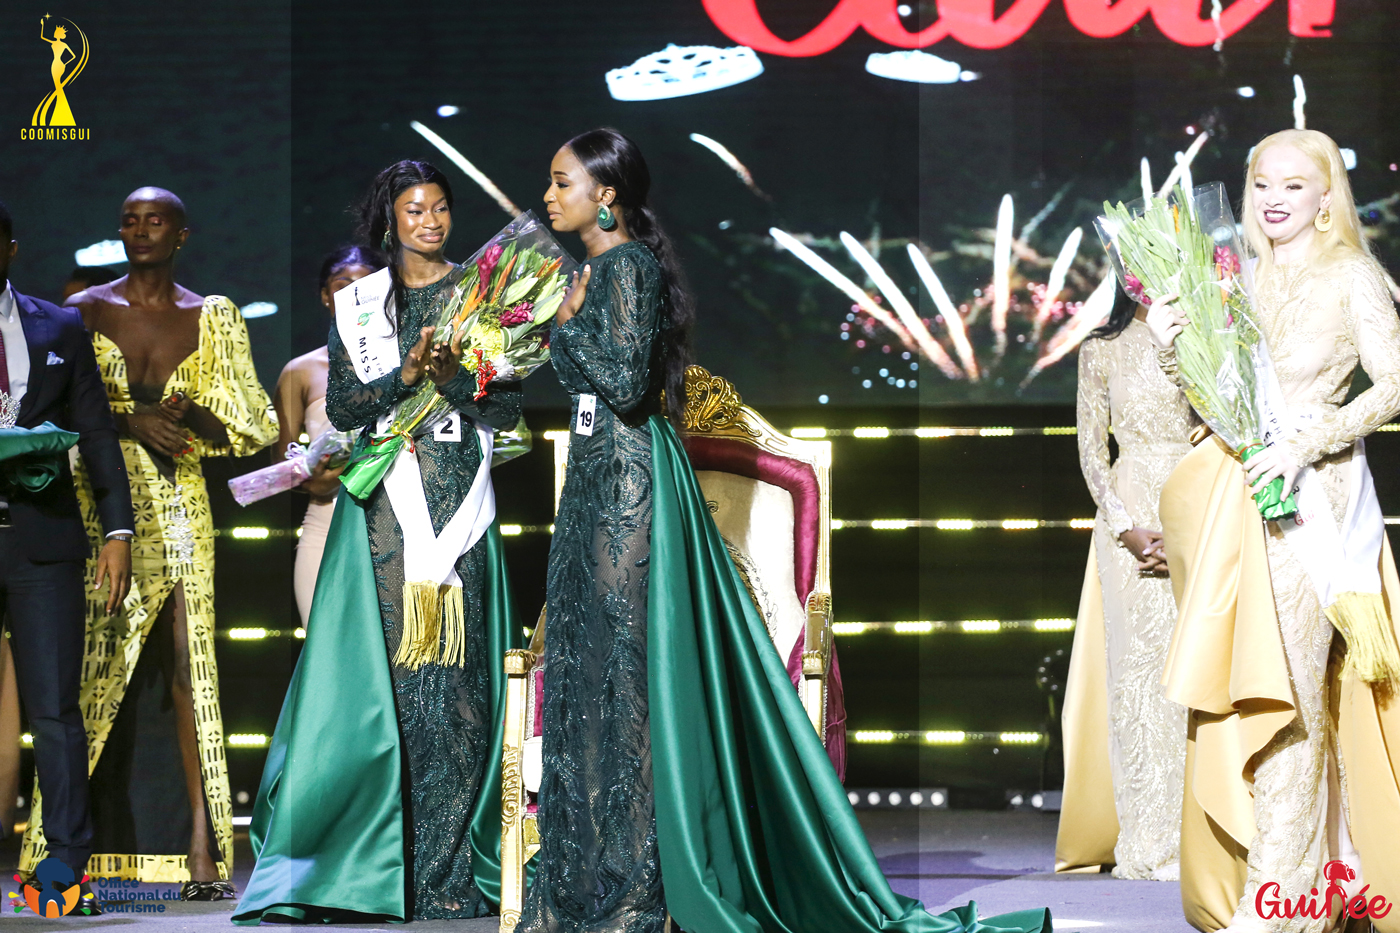 Saran Kourouma, 1st runner-up Conakry 2023 who becomes Miss Guinea 2023, succeeding Mariame Touré, Miss Guinea 2019 - 1st Runner-up Hadja Kadiatou Condé Miss Conakry 2023 - 2nd Runner-up Aïssatou Dioumo Diallo Miss Alby Beauty 2023 - Under the patronage of the First Lady of Guinee Republic, her excellency Mrs LAURIANE DOUMBOUYA